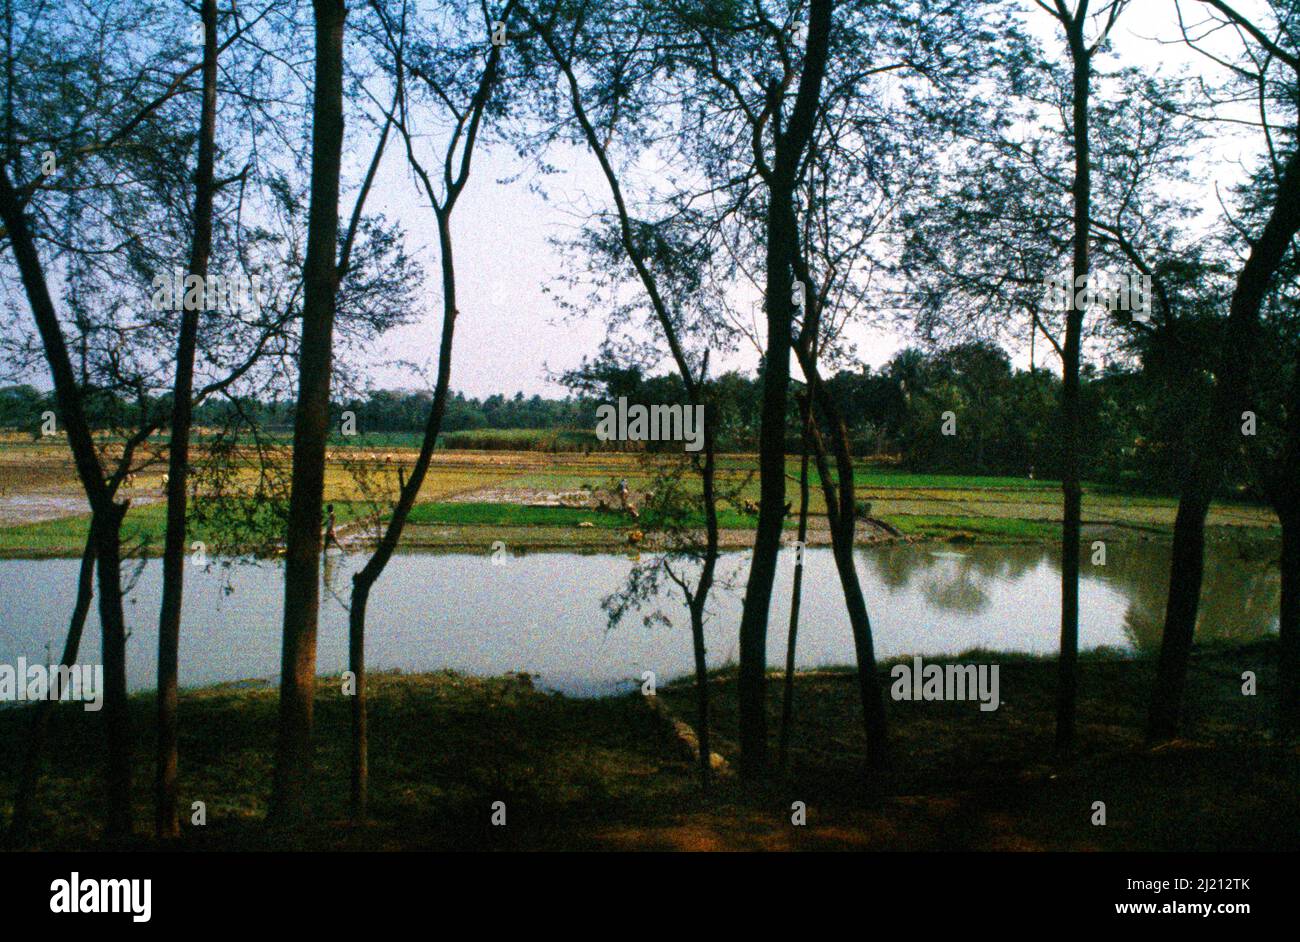 Bay of Bengal India River Hoogly through trees Stock Photo